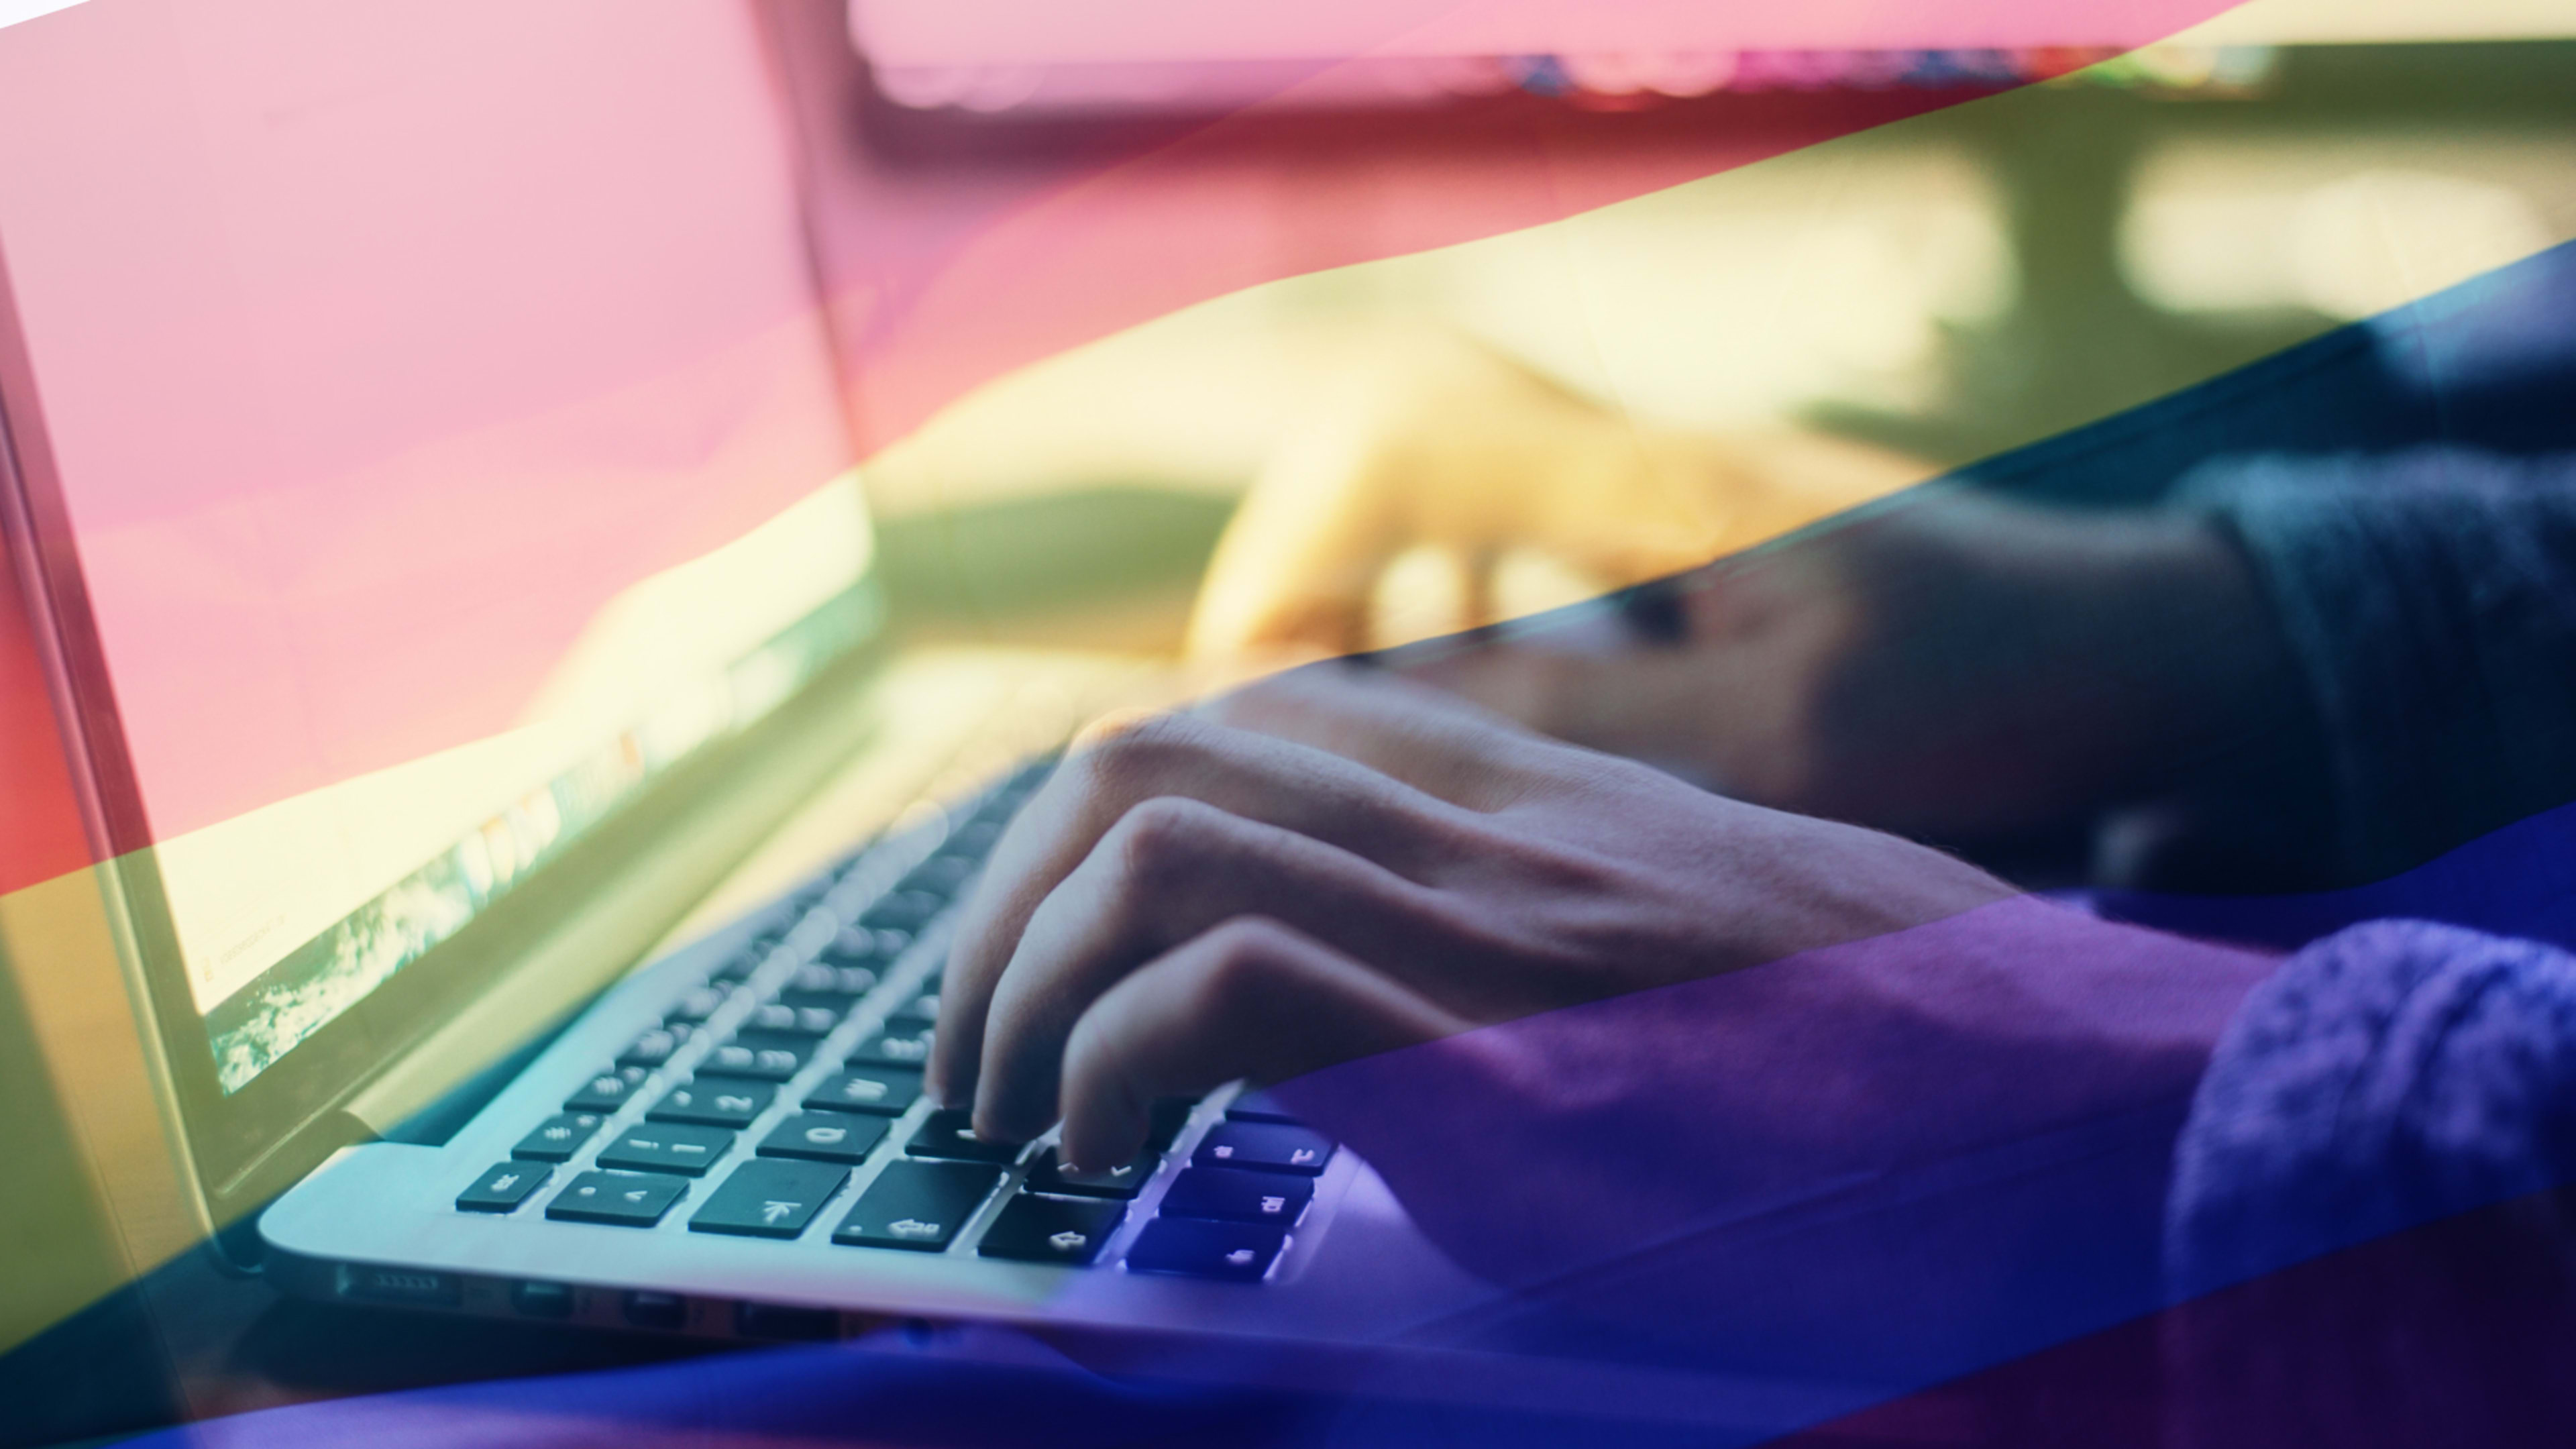 A shocking 73% of stories on LGBTQ websites are being flagged as unsafe for brands, survey says